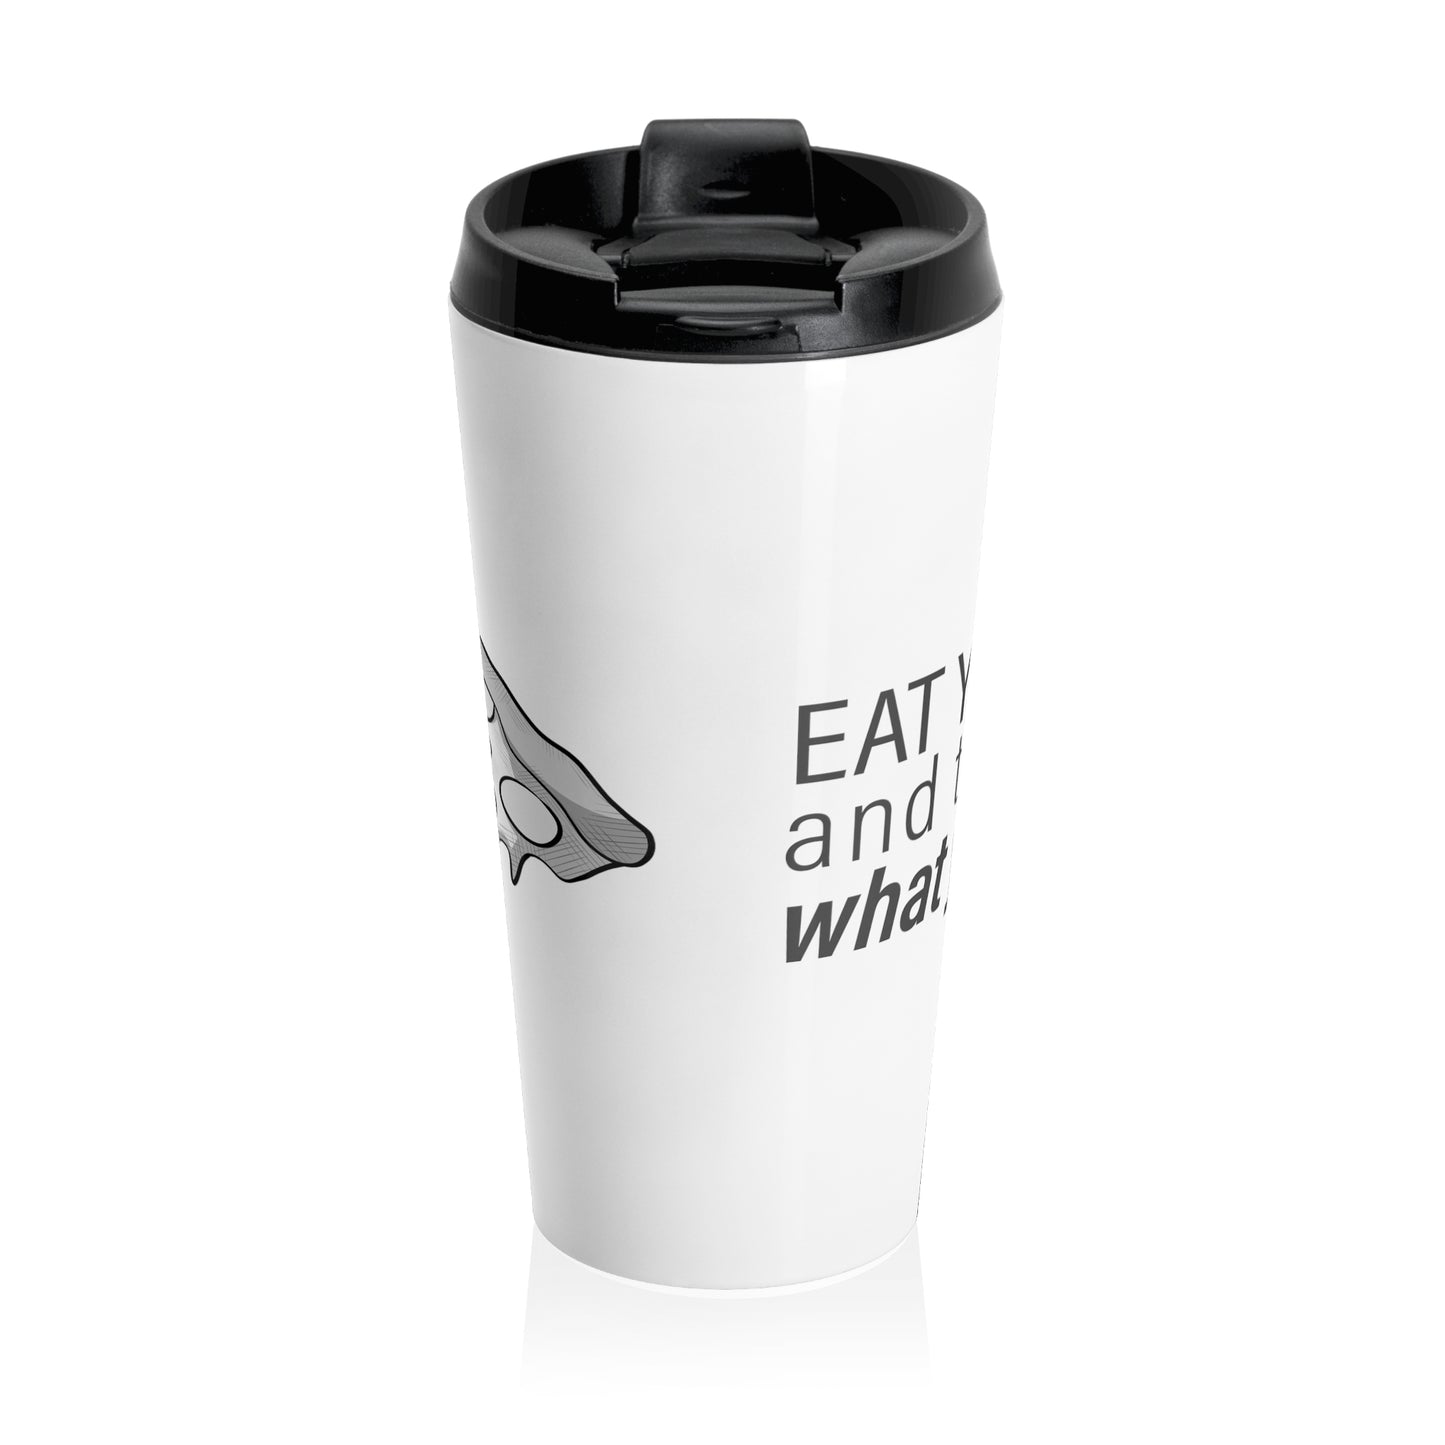 "Eat Your Pizza" - Stainless Steel Travel Mug